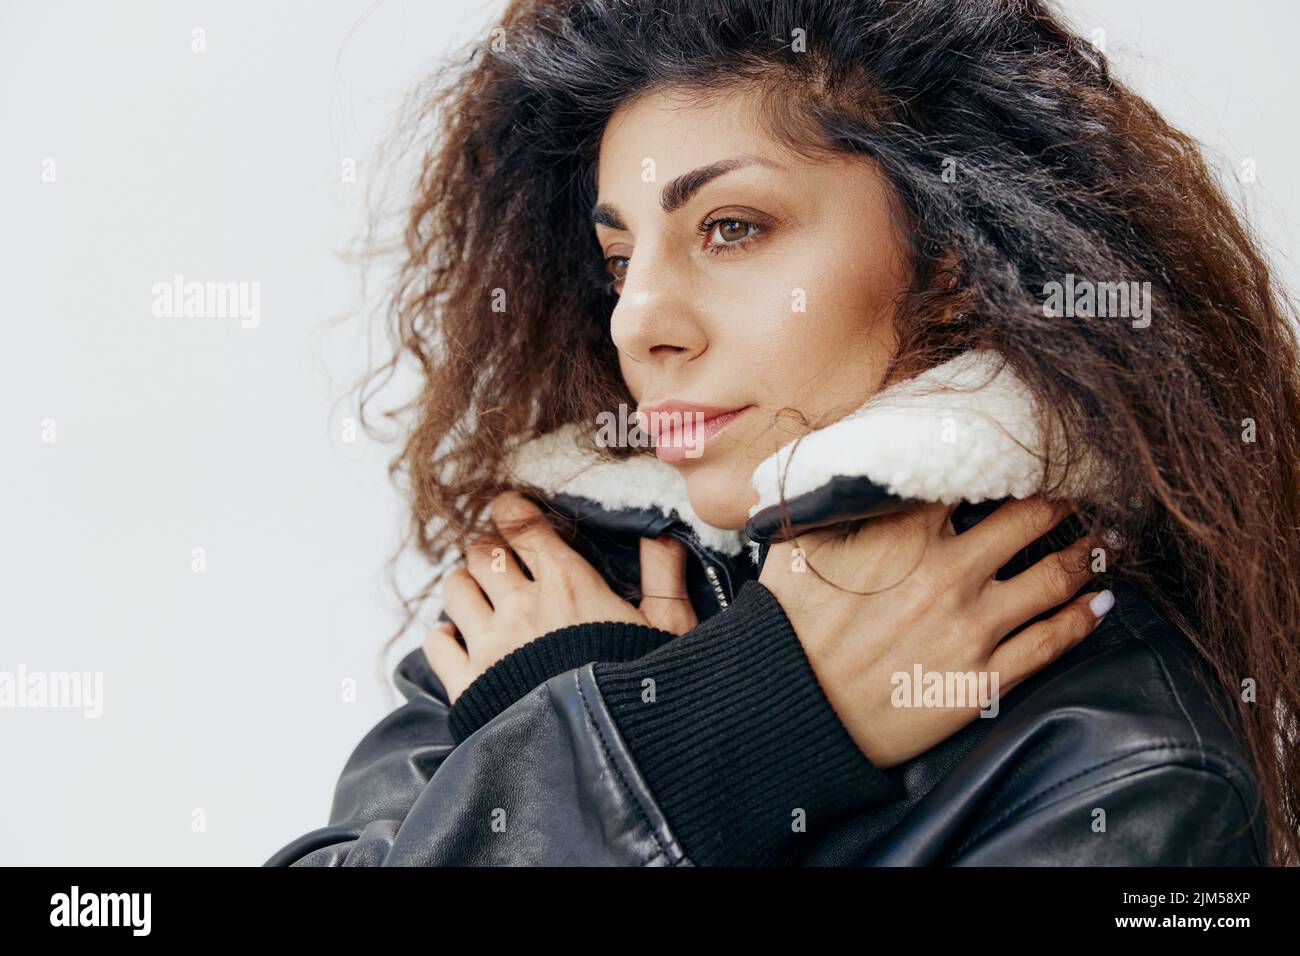 Close Up Of Thoughtful Curly Pretty Latin Lady Wrapping In Warm Leather Black Jacket With Fur Collar Looking Aside Posing Isolated At White Studio Stock Photo